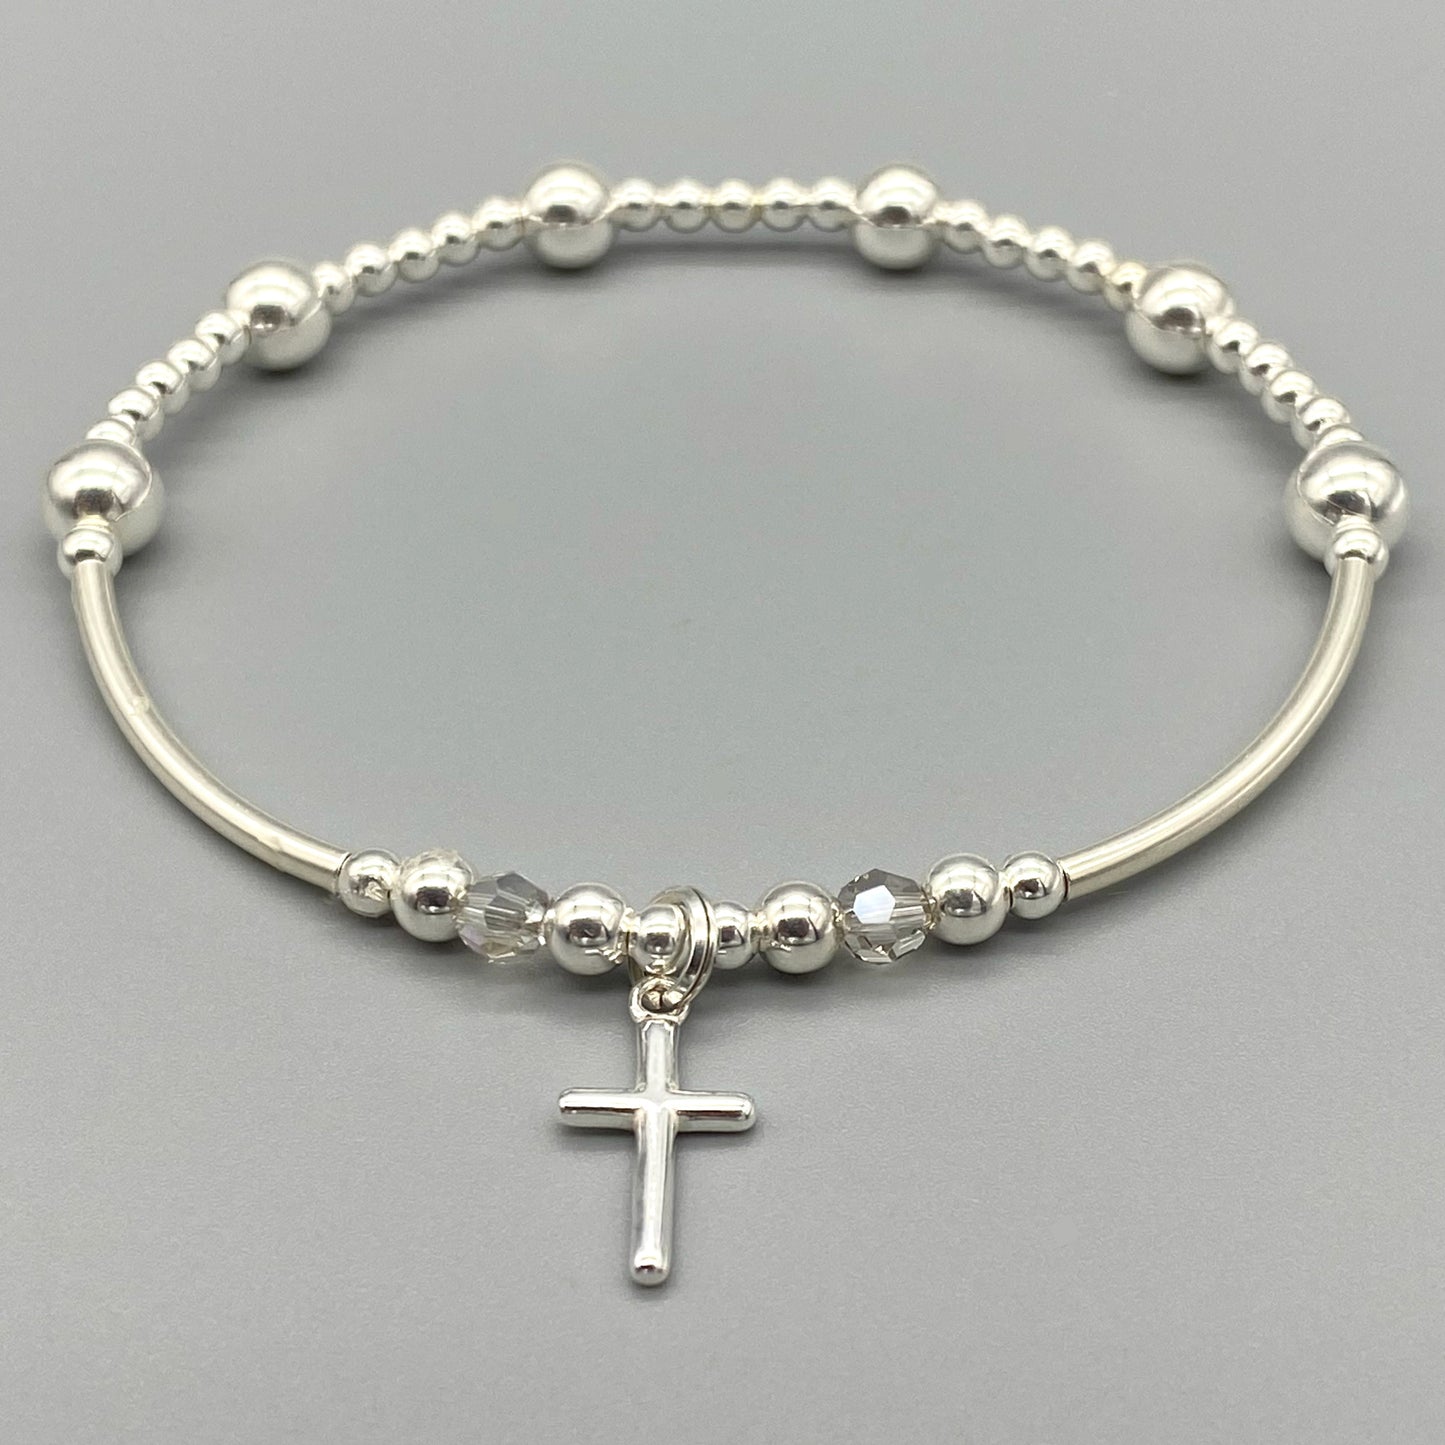 Cross Charm & Crystal Beads Sterling Silver Stacking Bracelet for her by My Silver Wish